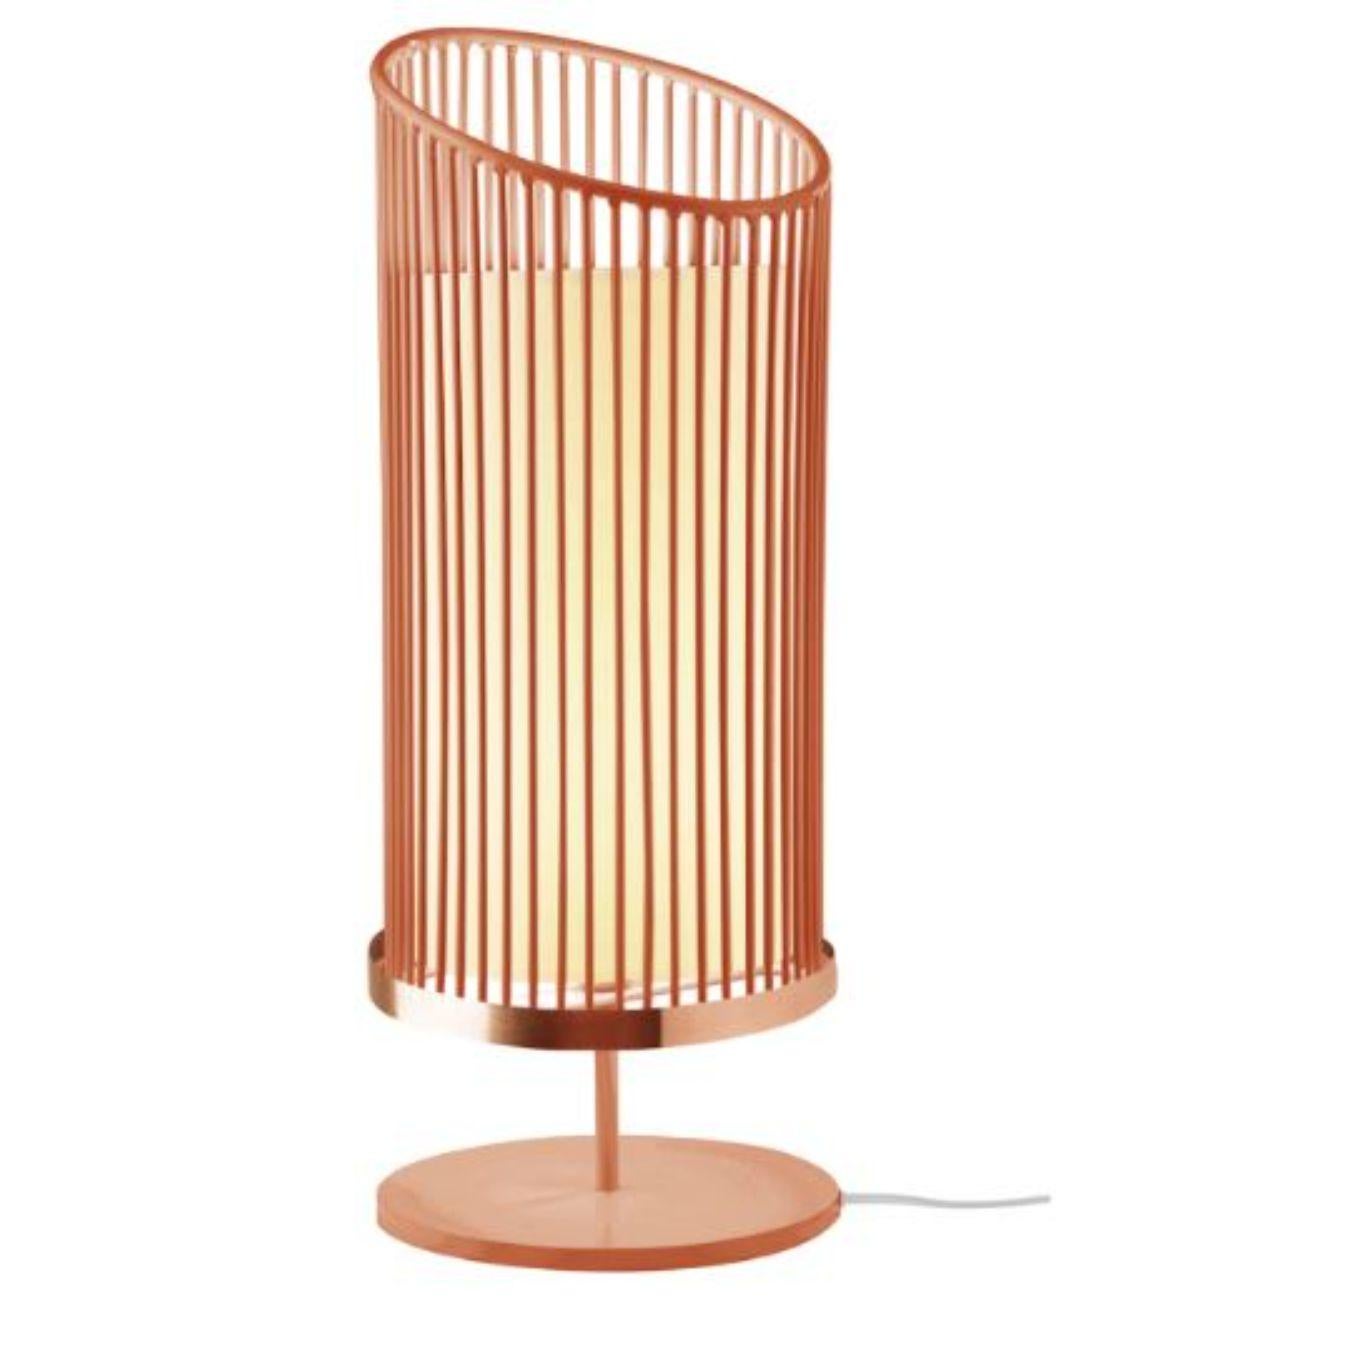 Salmon new spider table lamp with copper ring by Dooq.
Dimensions: W 24 x D 24 x H 60 cm
Materials: lacquered metal, polished or brushed metal, copper.
Also available in different colors and materials.

Information:
230V/50Hz
E27/1x20W